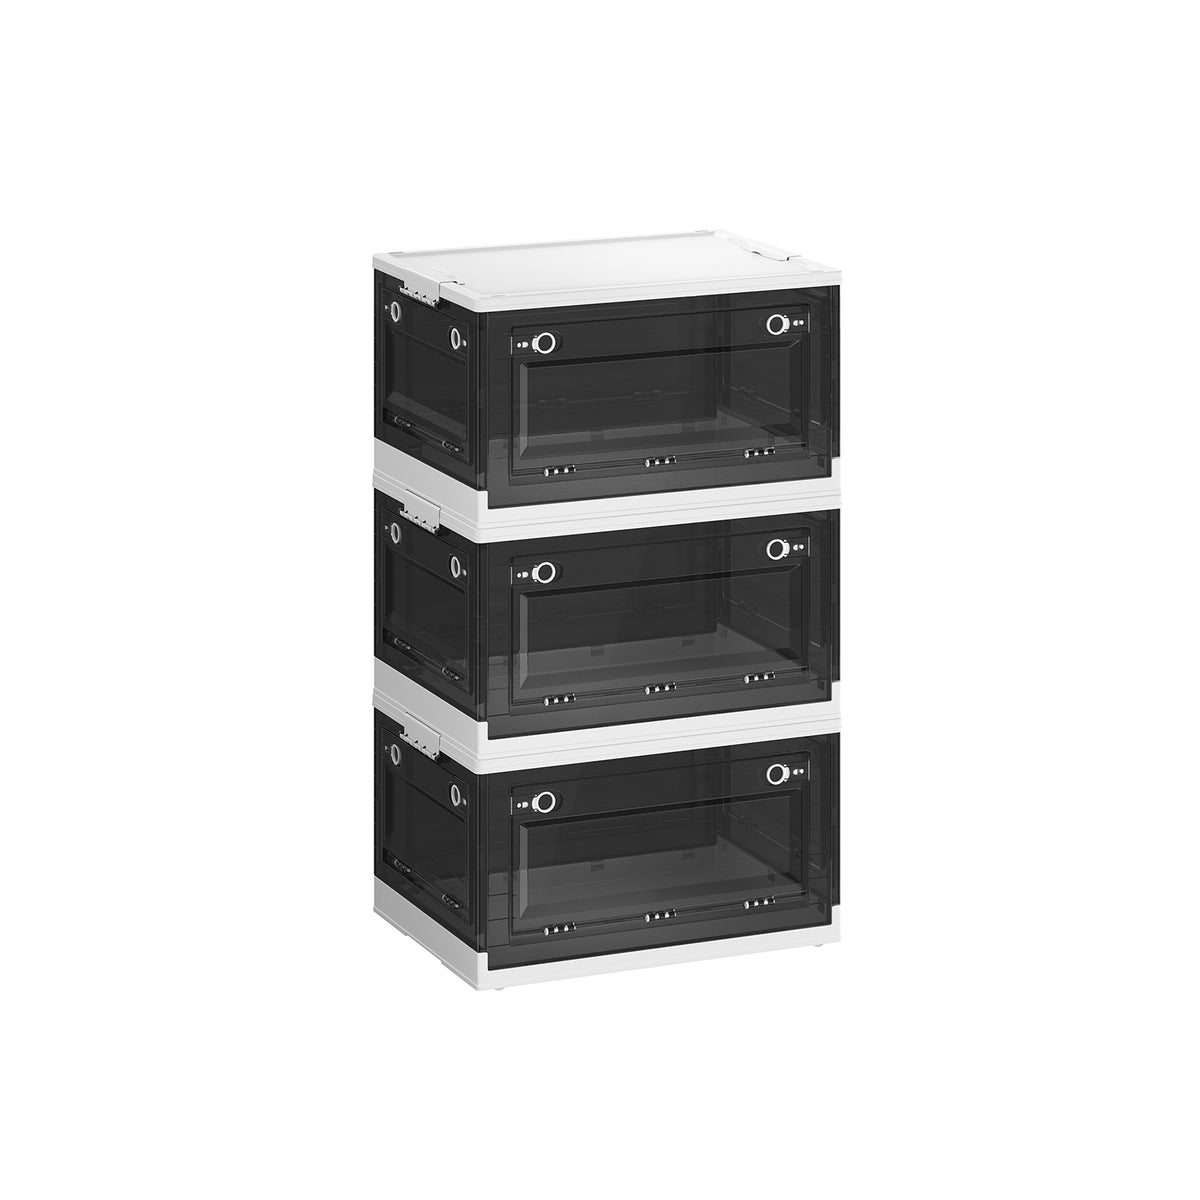  SONGMICS Storage Bins with Lids, Set of 4 Dorm Storage Bins,  Collapsible Cubes with Magnetic Closures, a Semi-Open Front, Lid Can Stay  Open after Stacked up, Gray URLB22GY